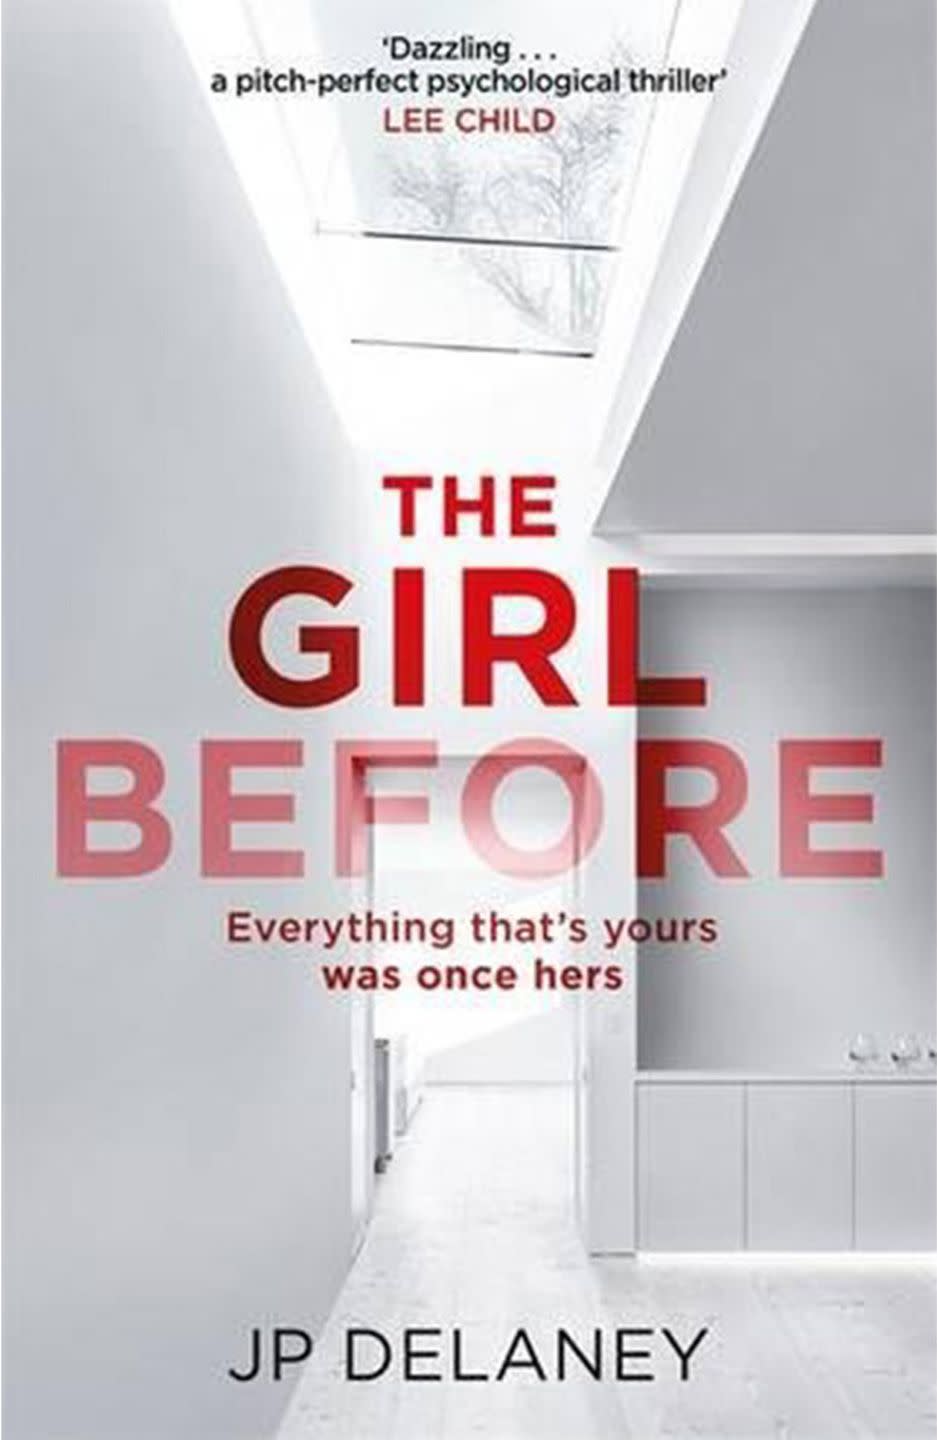 'The Girl Before' by JP Delaney